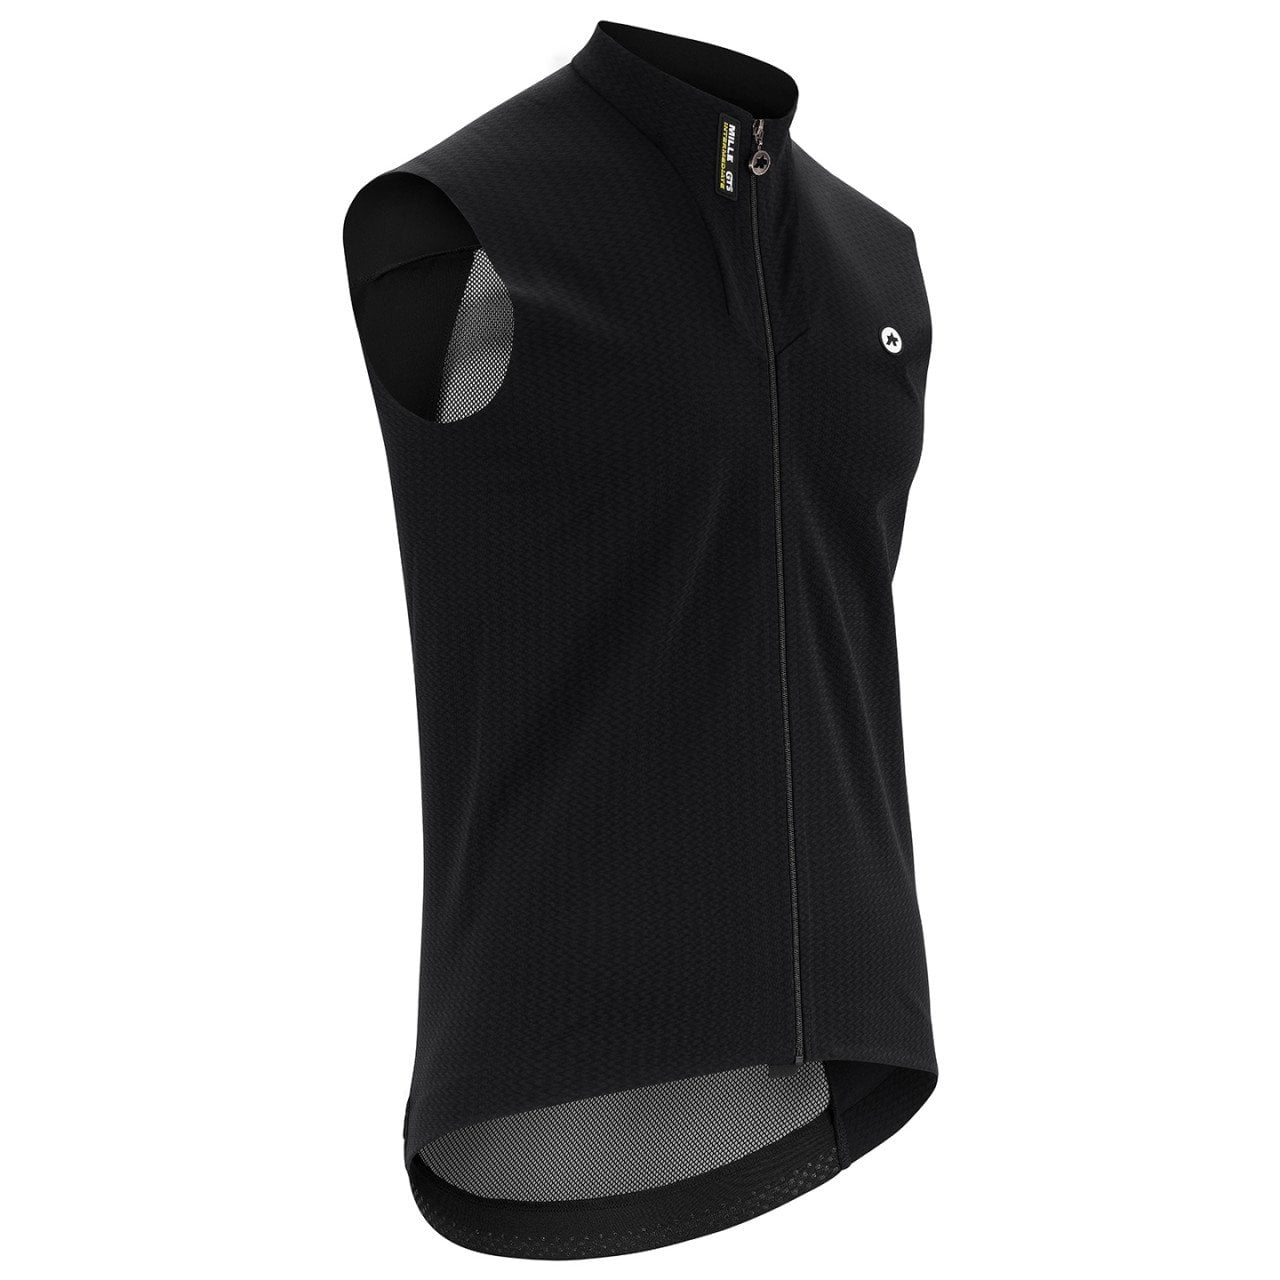 Gilet ciclismo Mille GTS Spring Fall C2